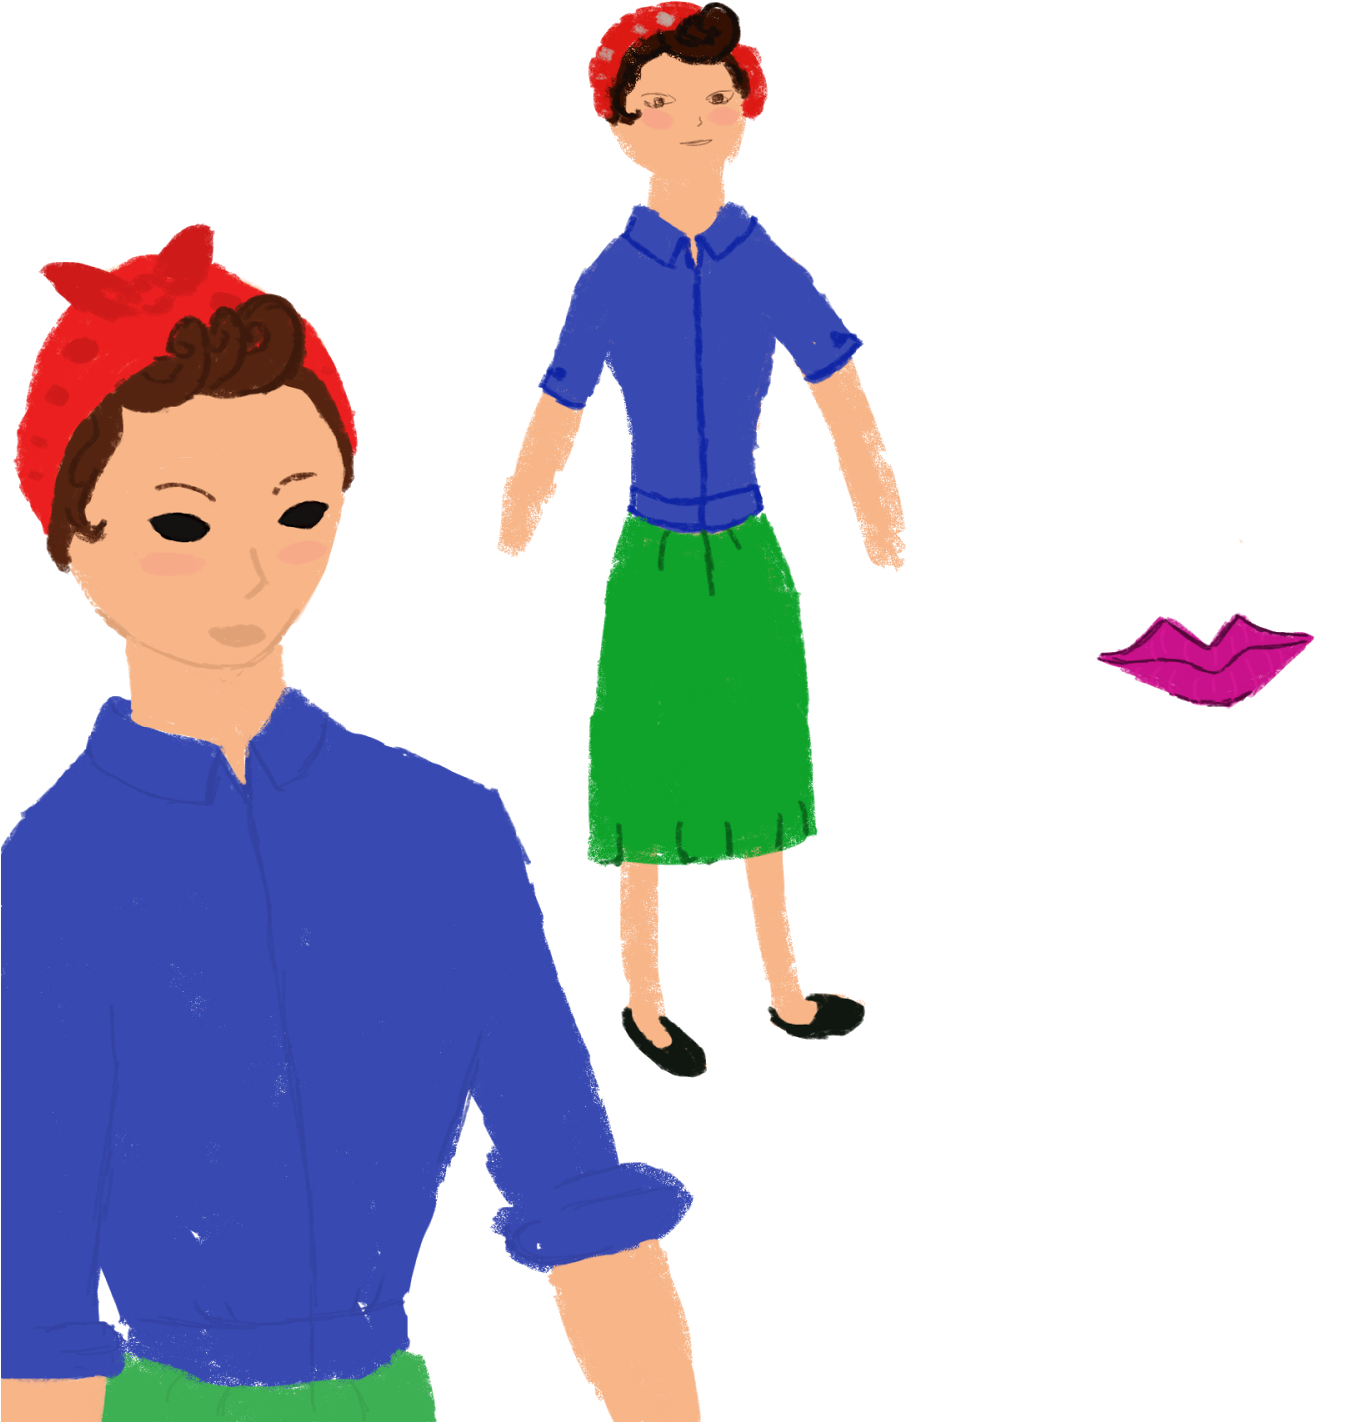 Here Are Some Developmental Pictures Of Rosie The Riveter - Cartoon (1600x1600)